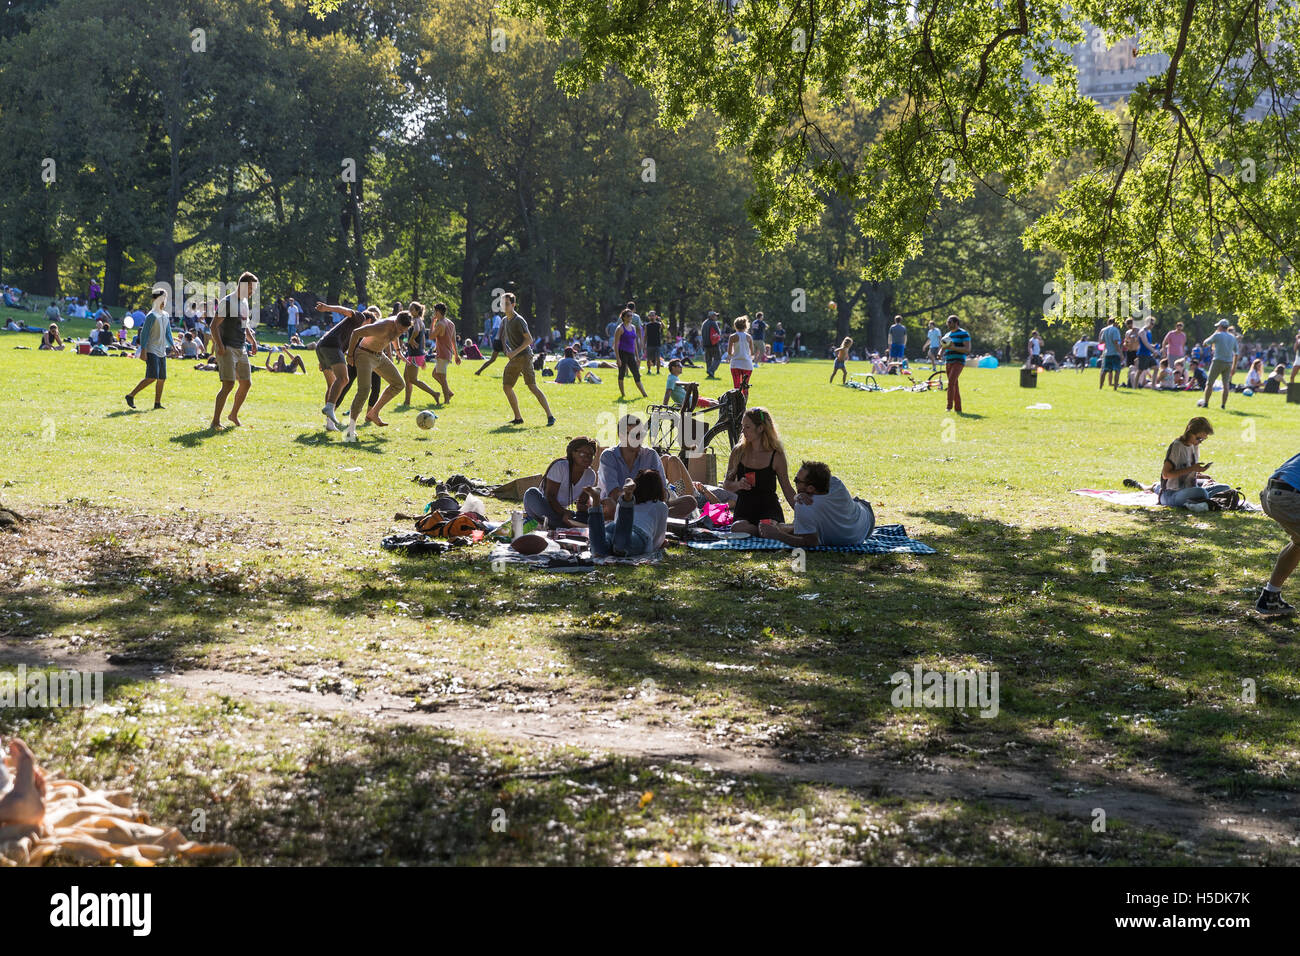 People enjoying a sunny day on a lawn in the Central Park, NYC Stock Photo